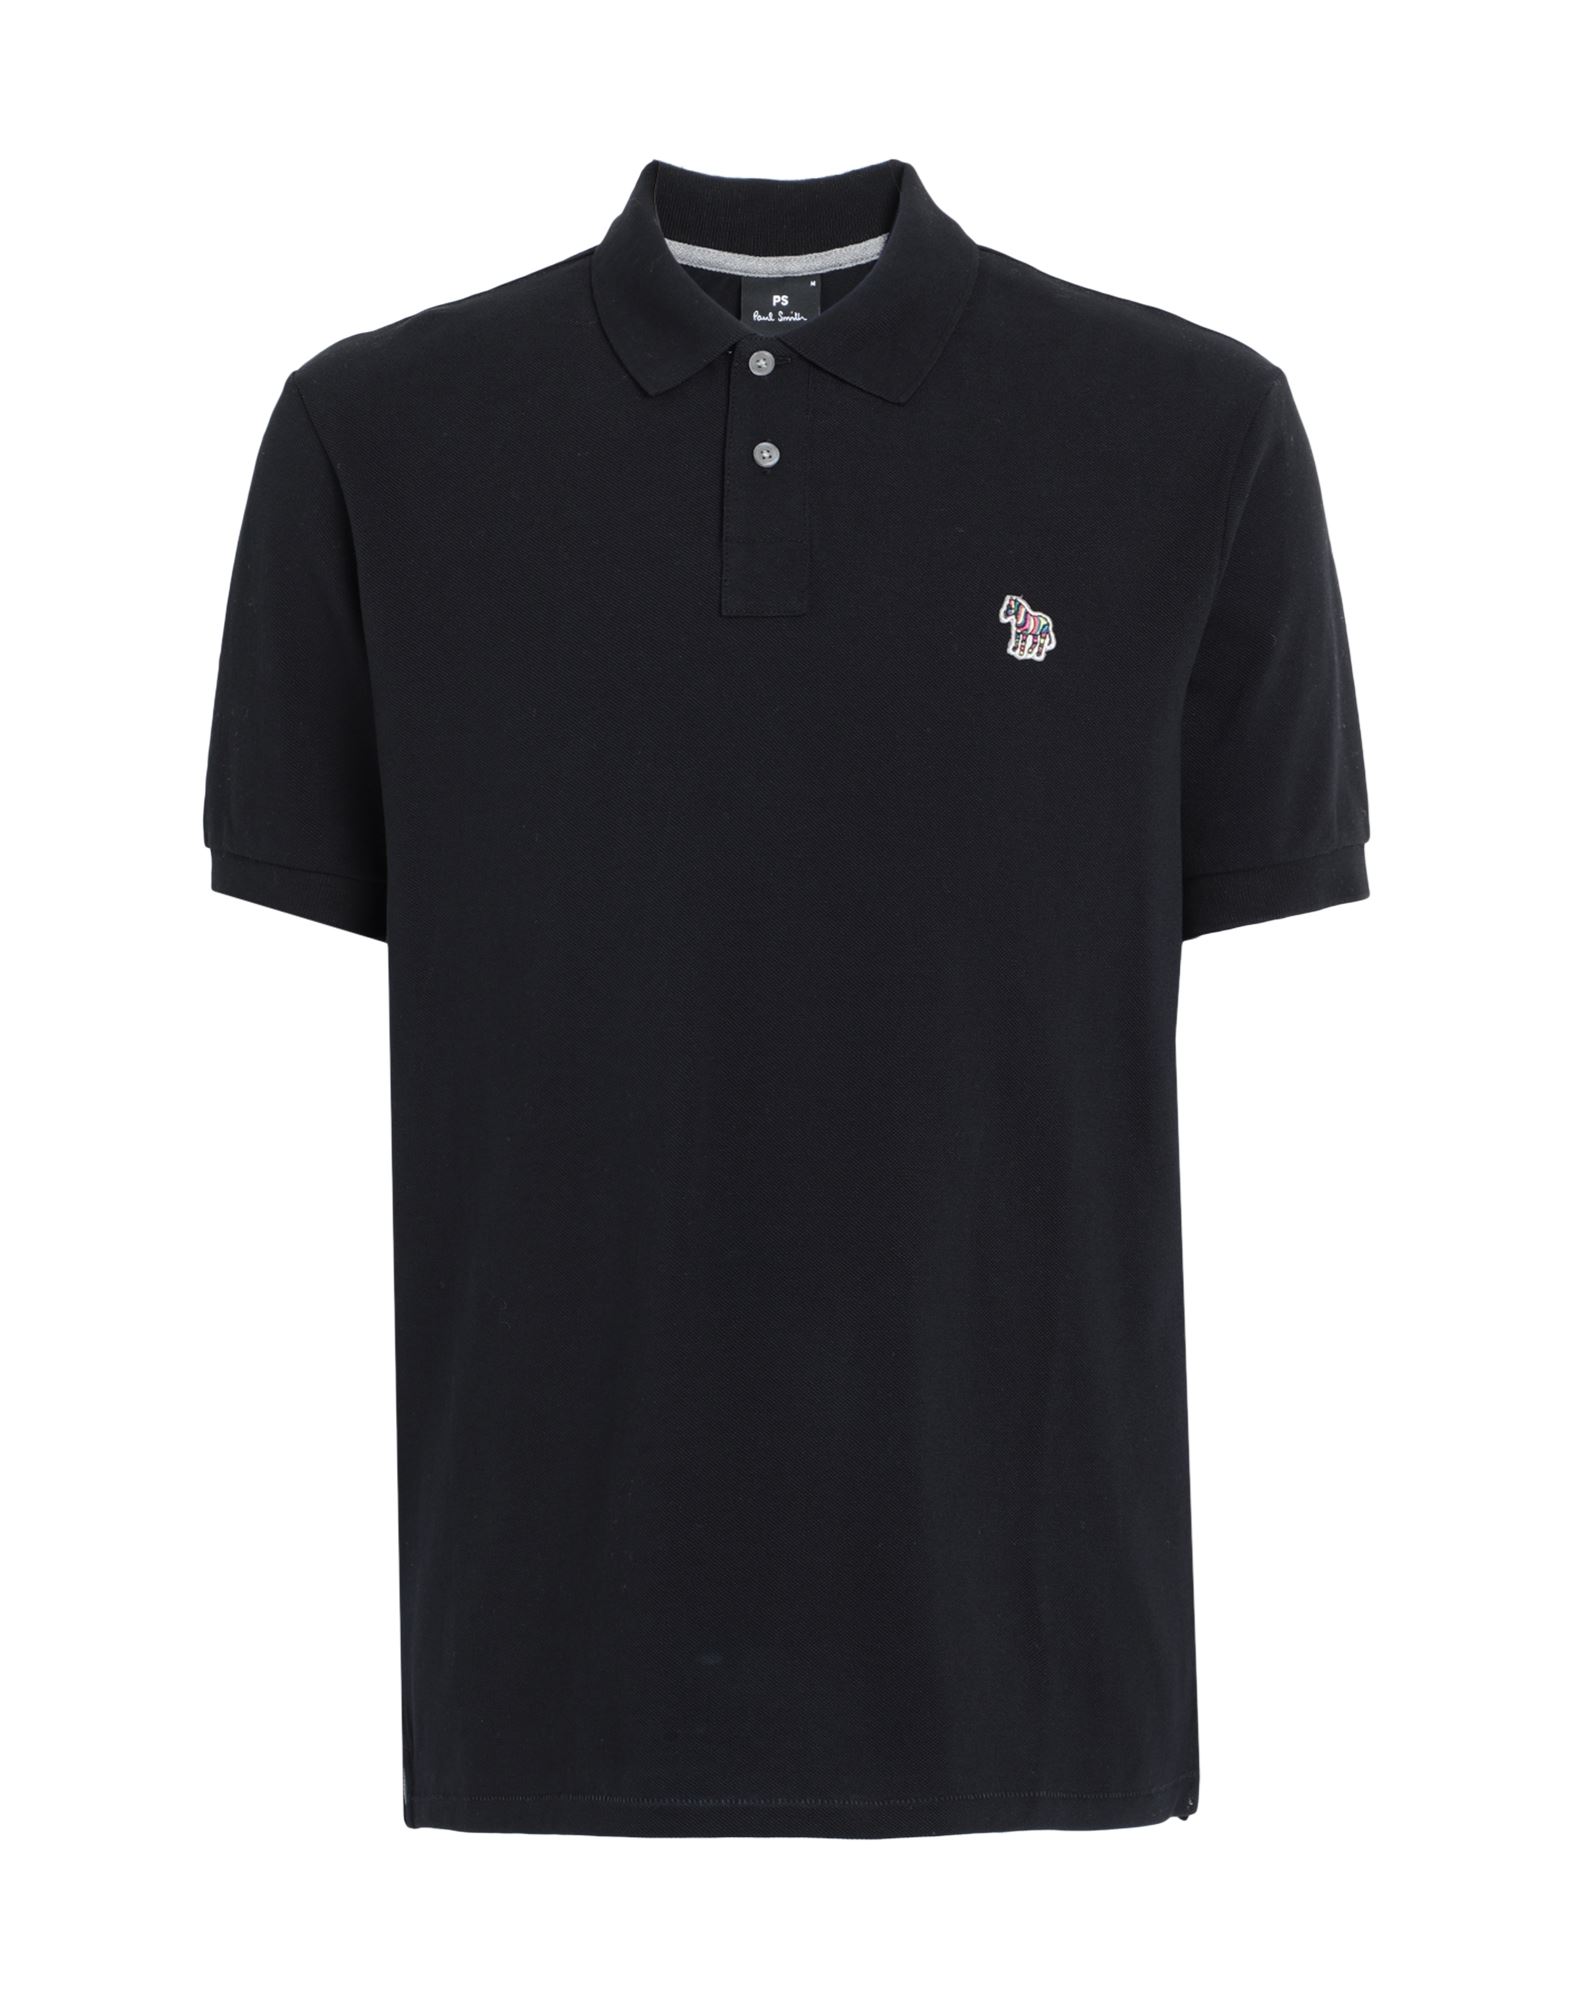 PS BY PAUL SMITH PS PAUL SMITH MAN POLO SHIRT BLACK SIZE S ORGANIC COTTON